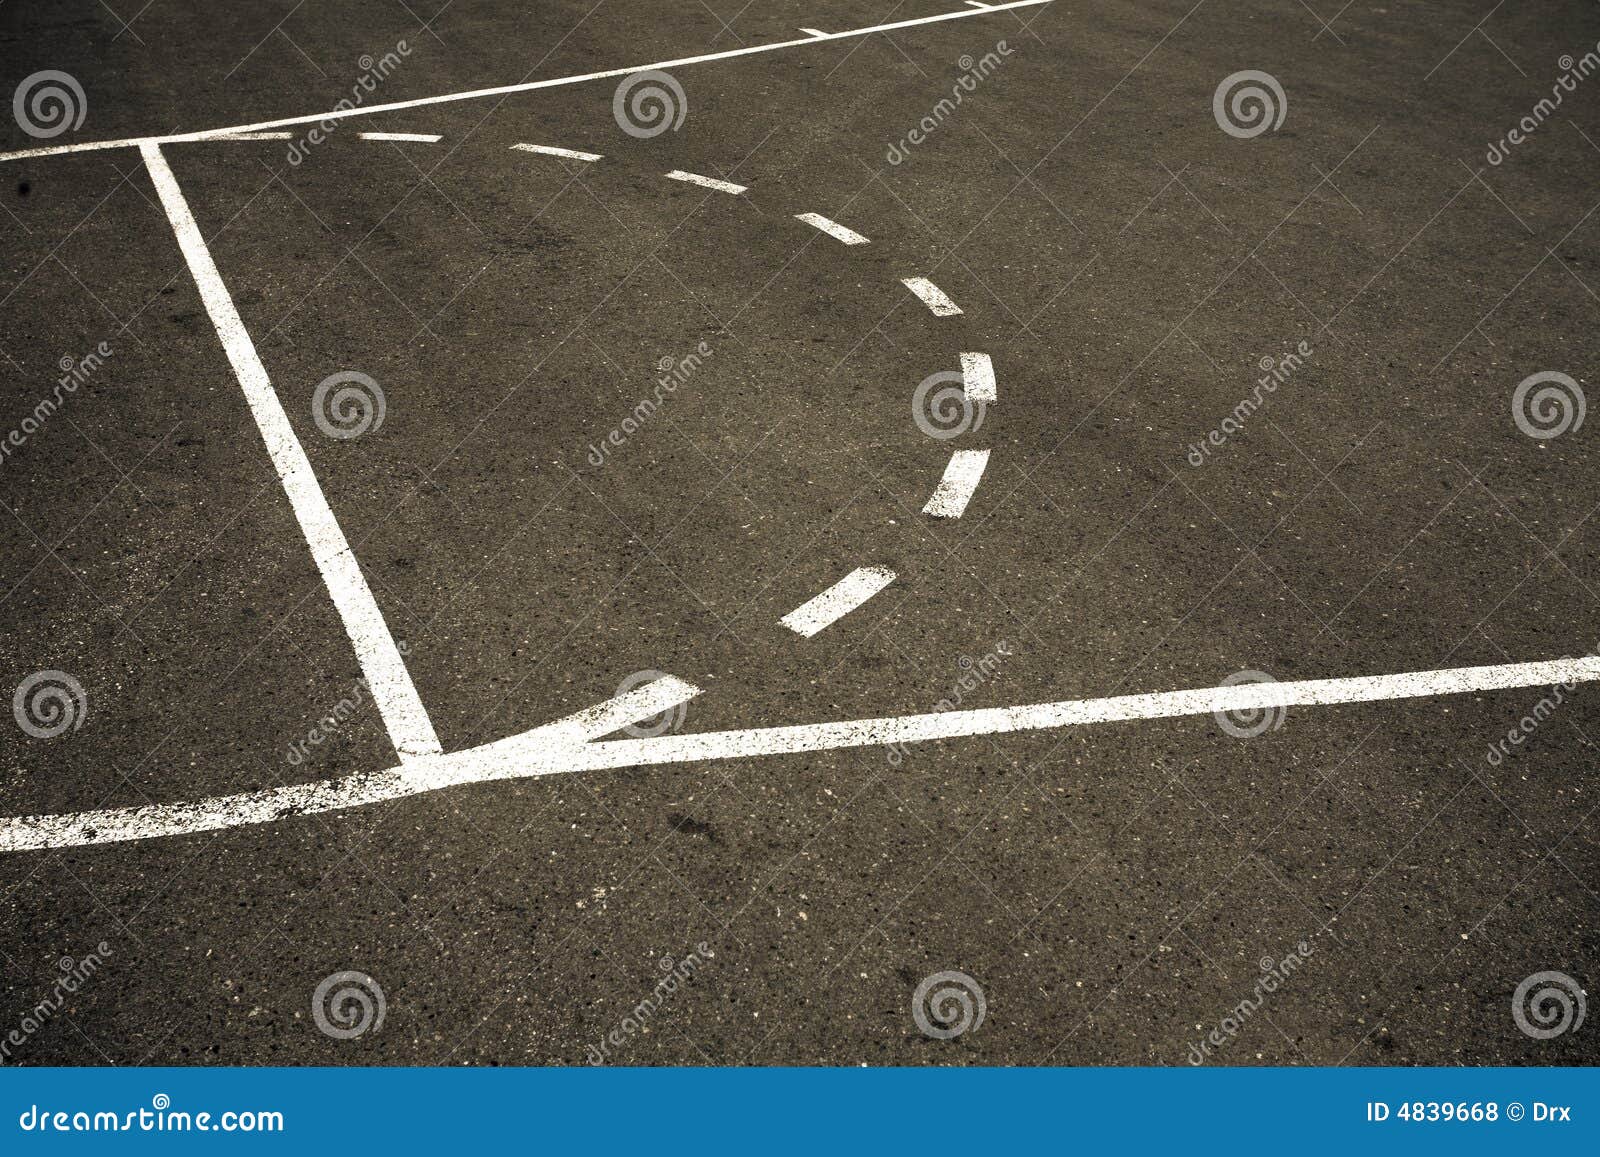 Street basketball court stock photo. Image of pitch, outdoors - 4839668